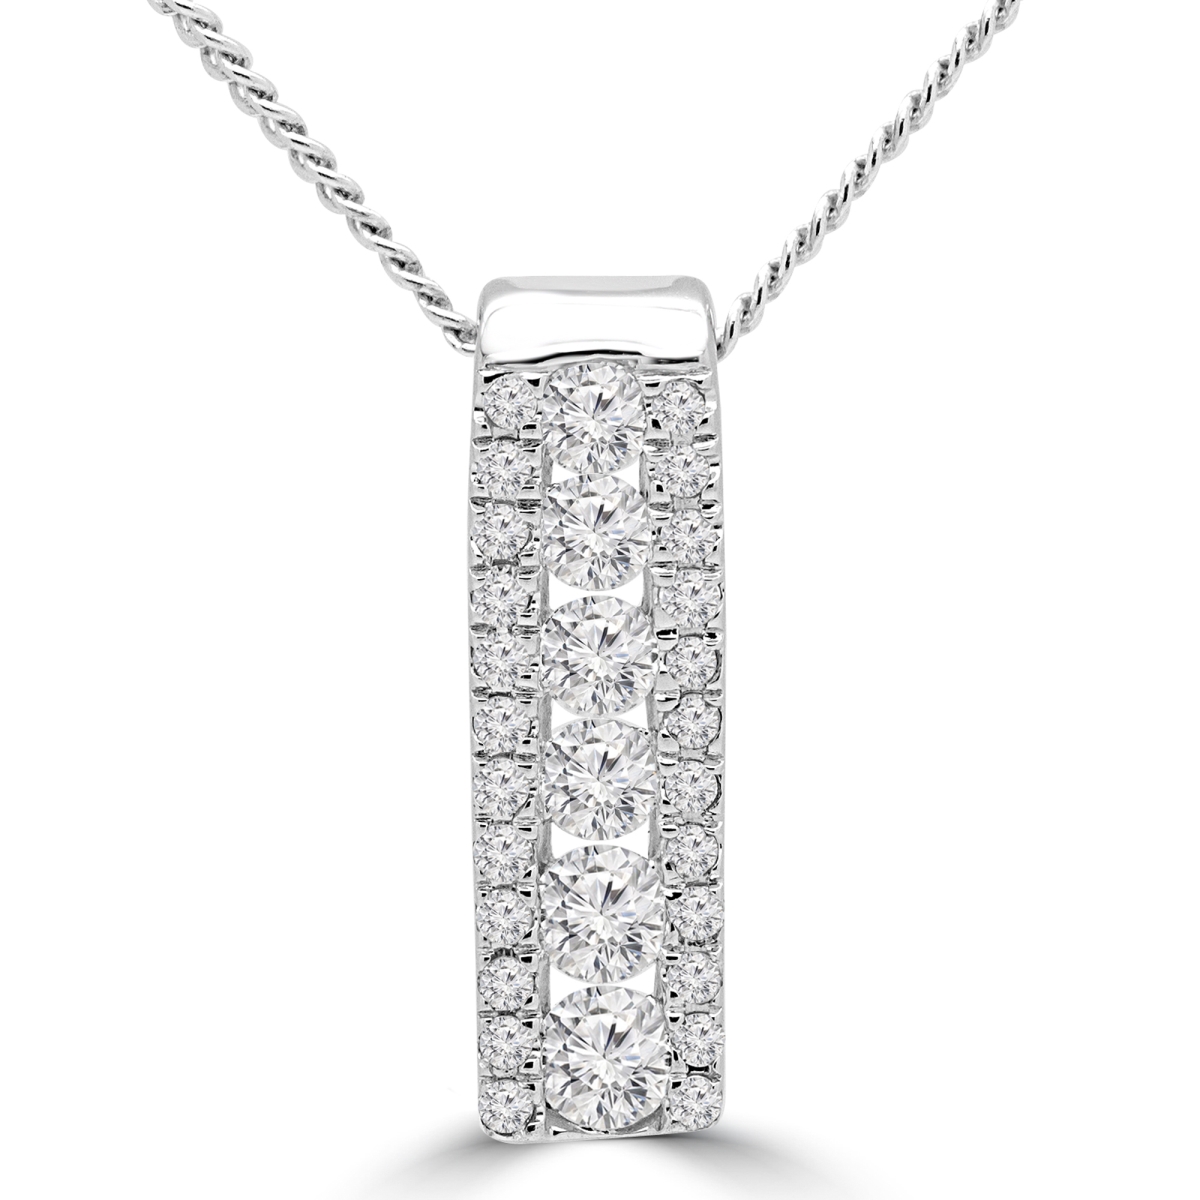 Mdr180018 0.4 Ctw Round Diamond Channel Set Bar Pendant Necklace In 14k White Gold With Chain